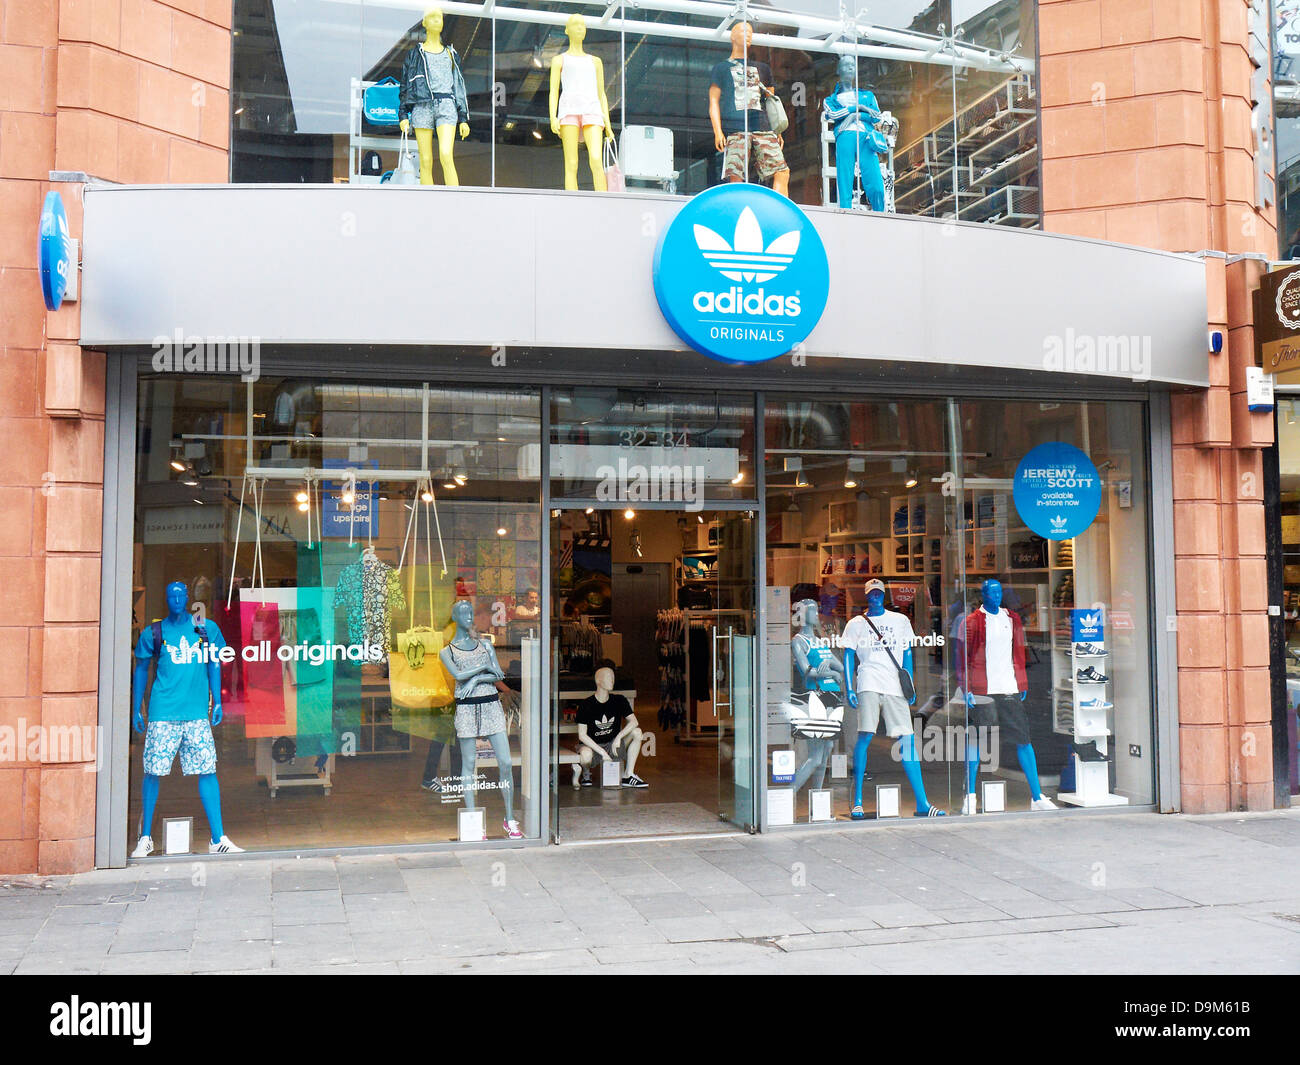 Adidas sport shop in Liverpool Photo